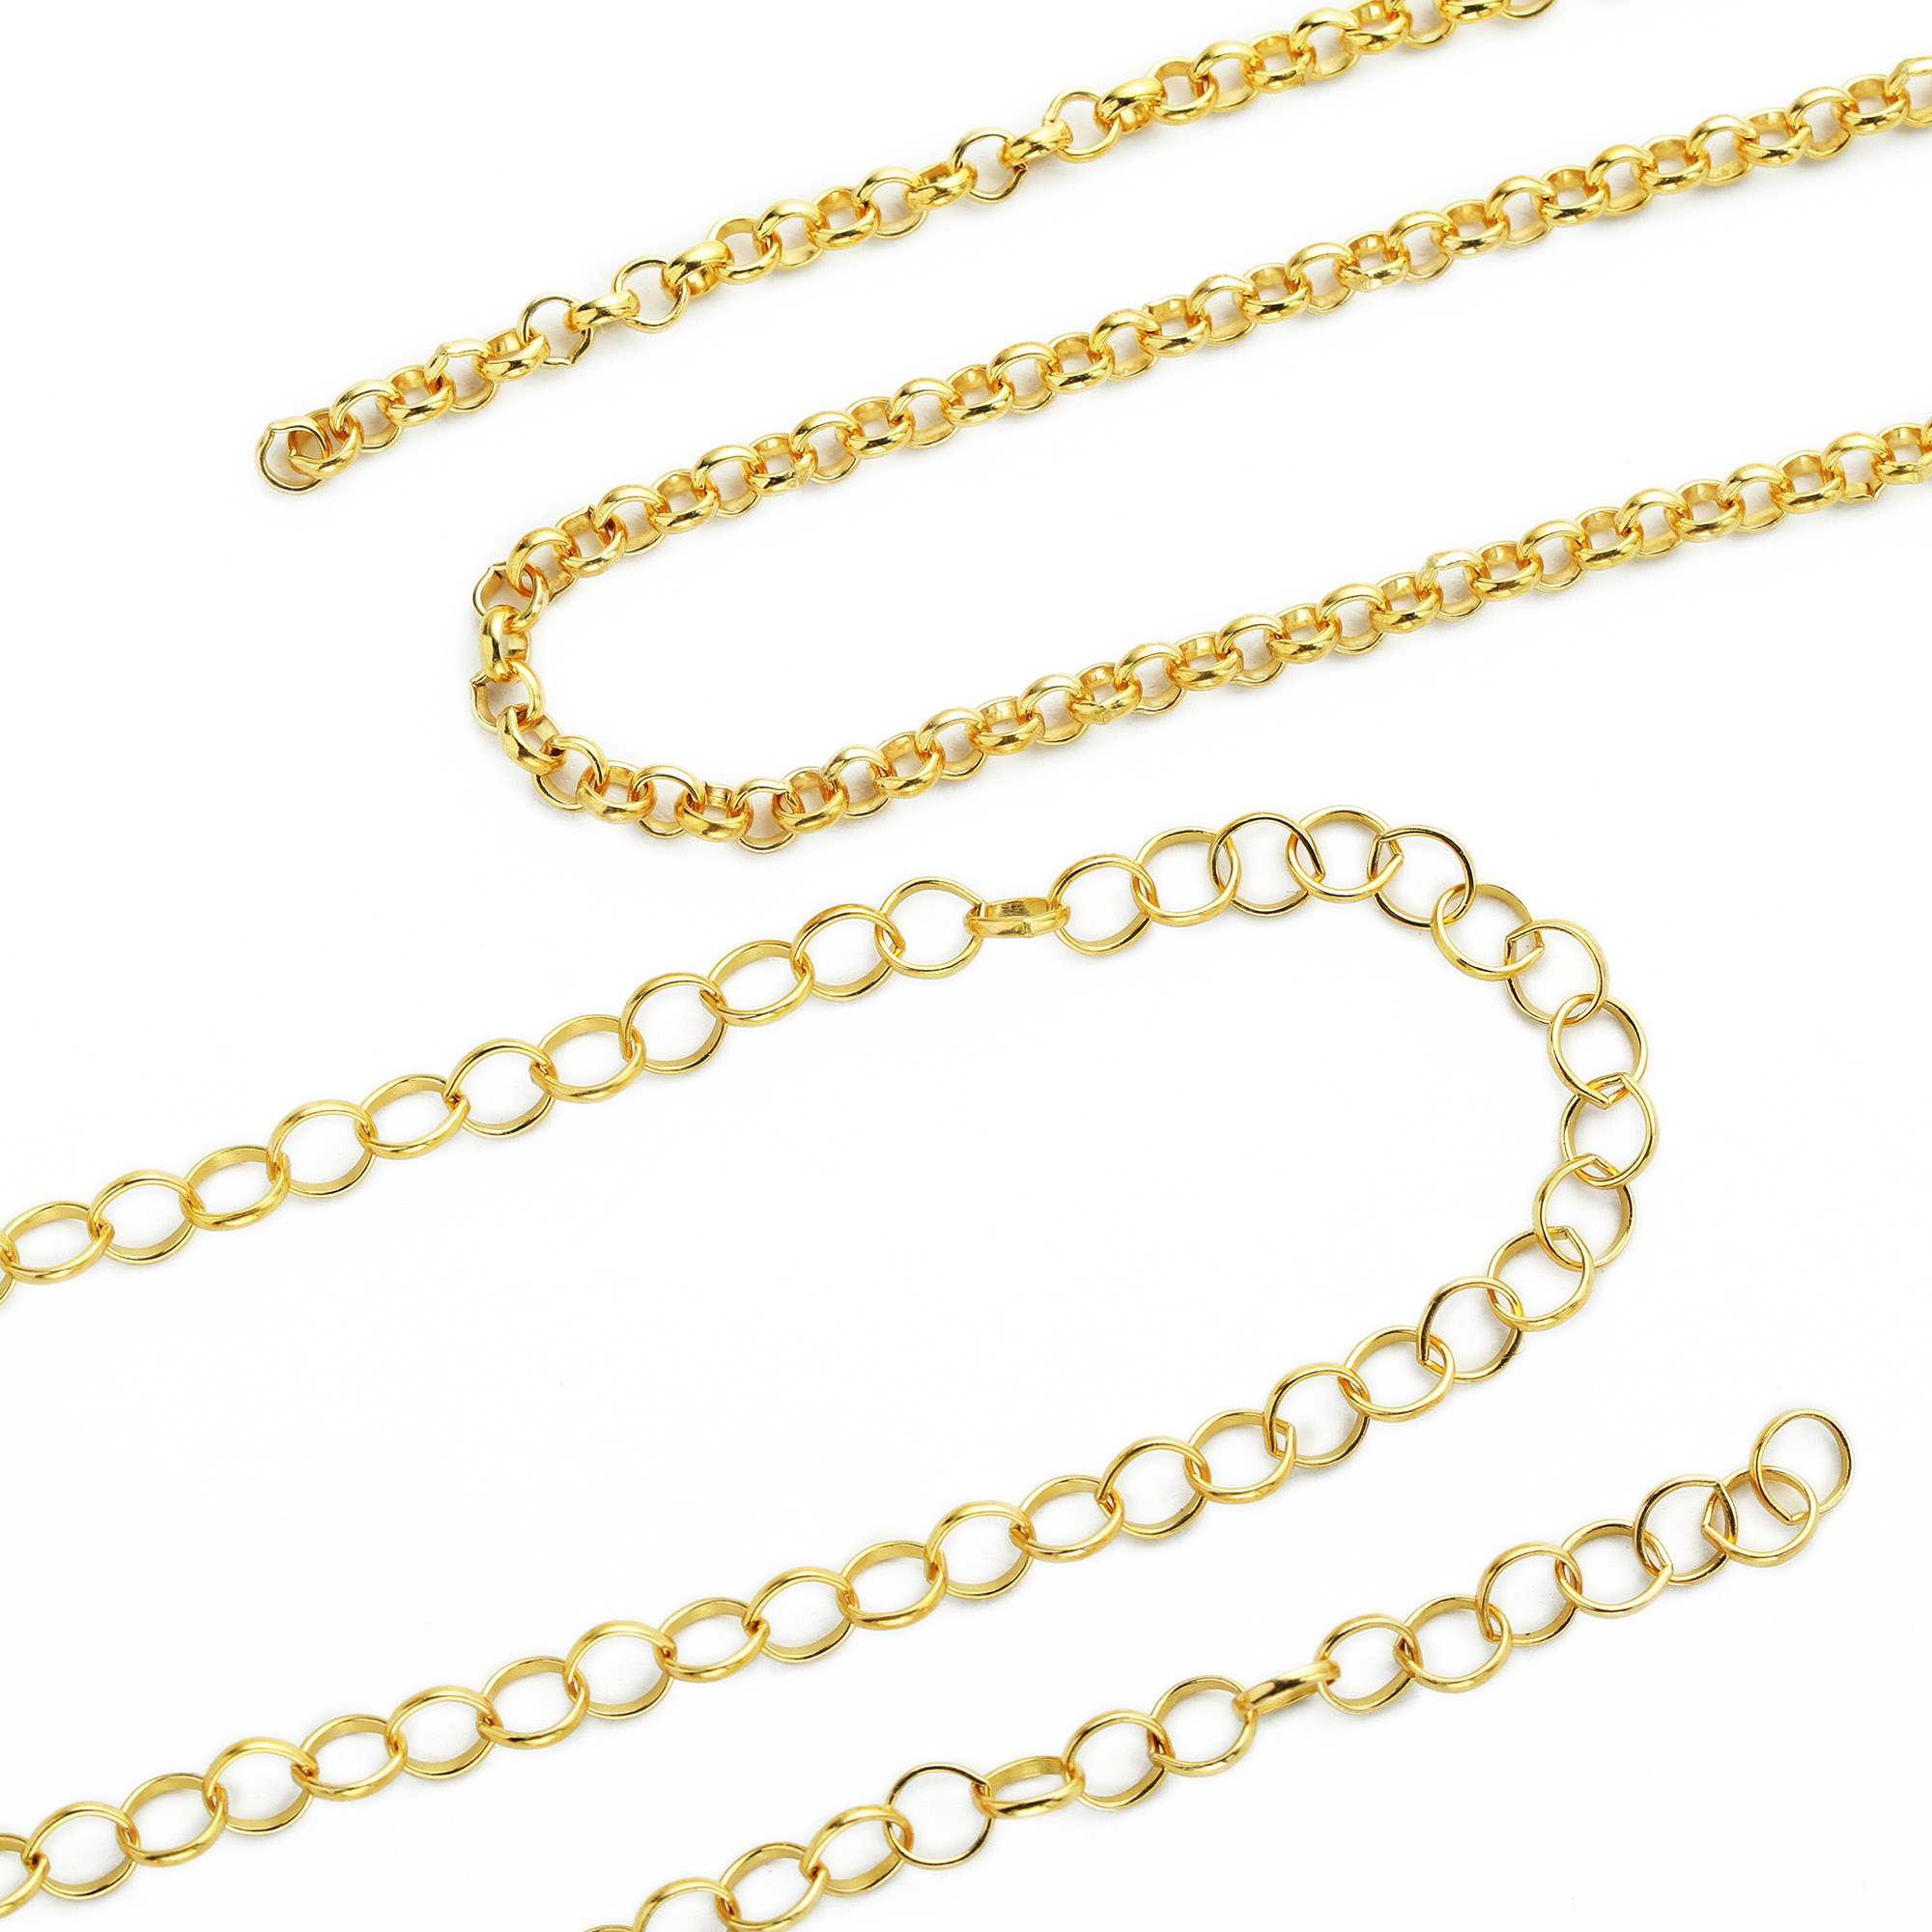 0.5Meter Cable Round Chain Necklace,14k Gold Filled Necklace Chain,Simple Necklace Chain,DIY Necklace Supplies 1325011 - Click Image to Close